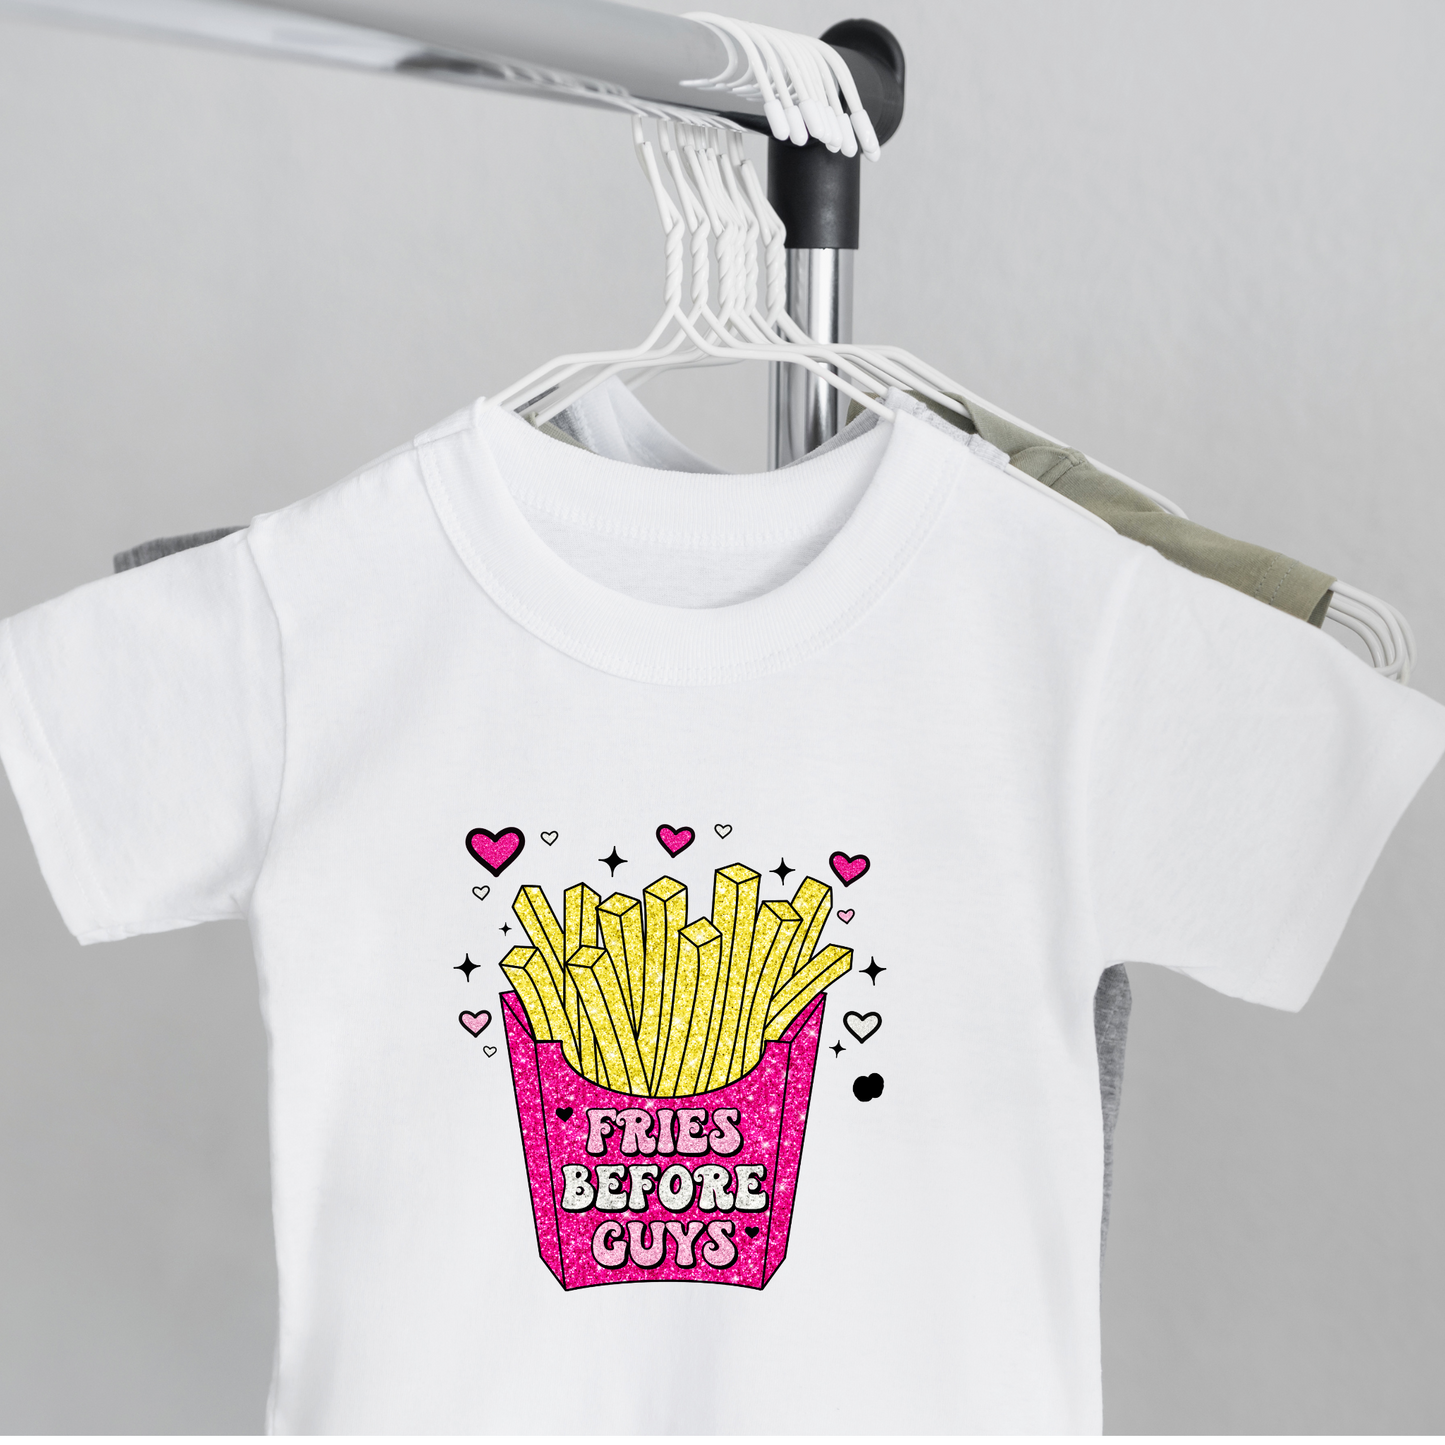 (Shirt not included) 7" Fries Before guys -  Matte Clear Film Transfer